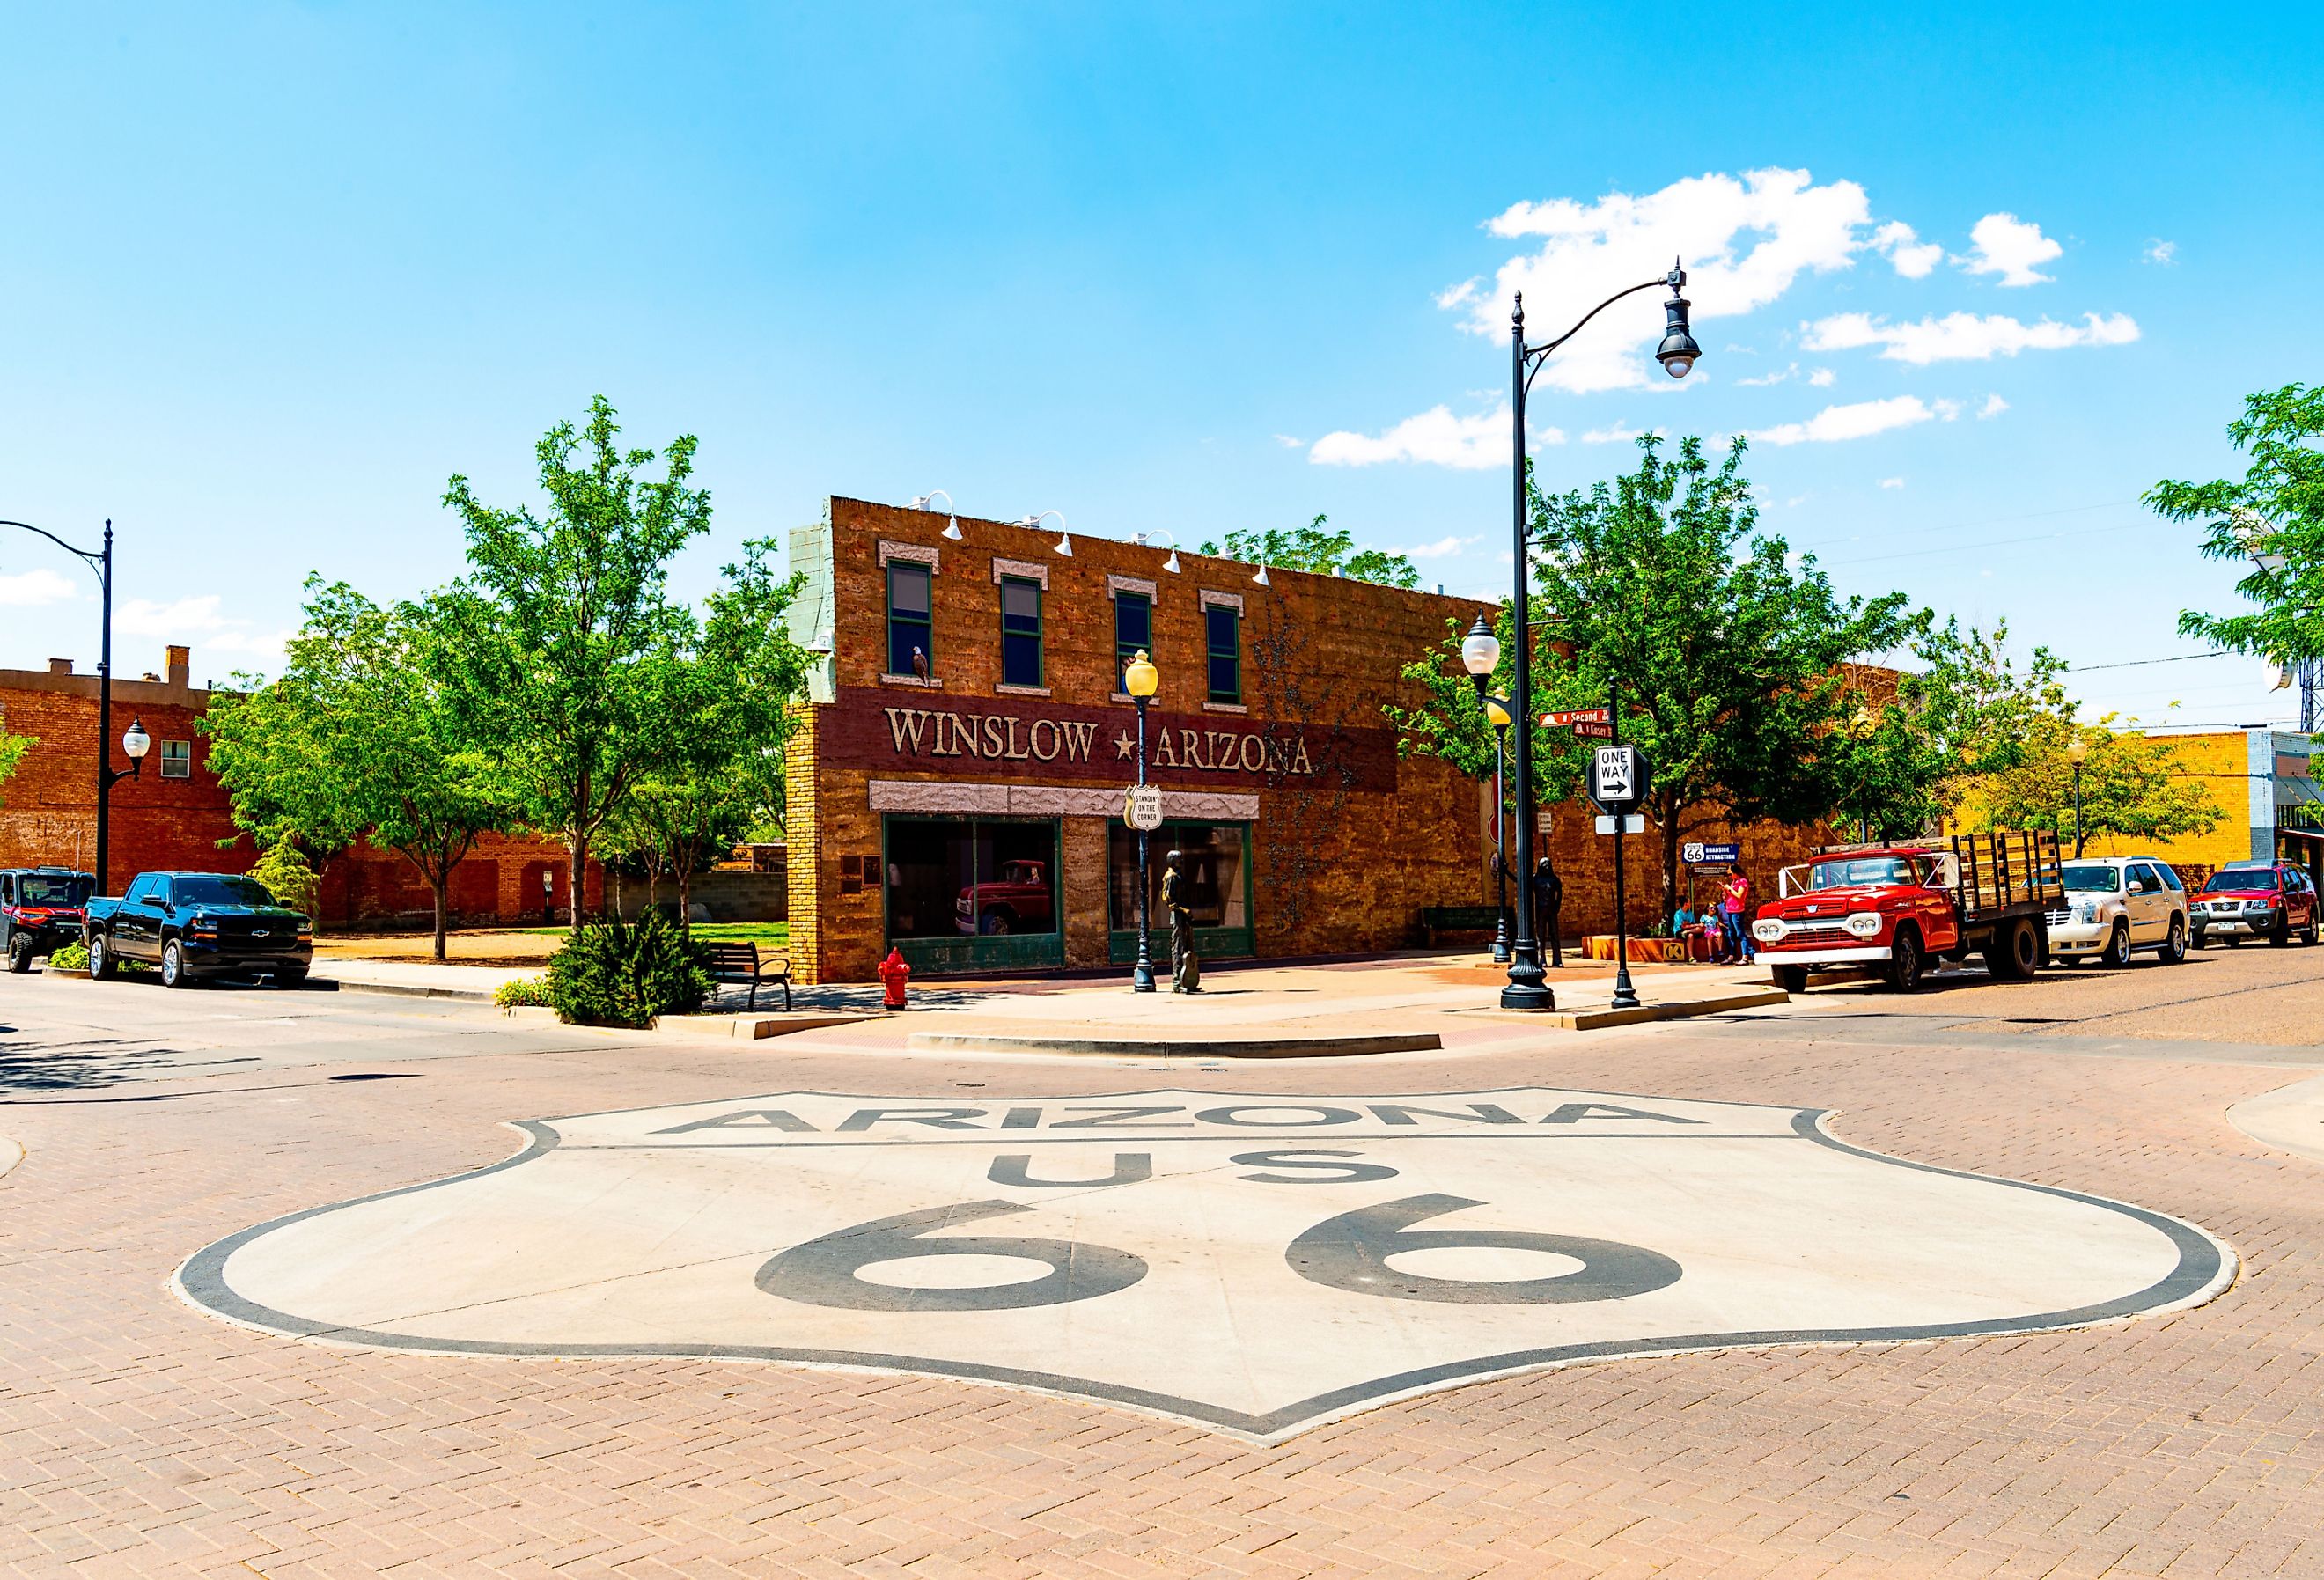 View of the downtown streets from the corner of Historic Route 66 in Winslow, Arizona. Image credit mcrvlife via Shutterstock